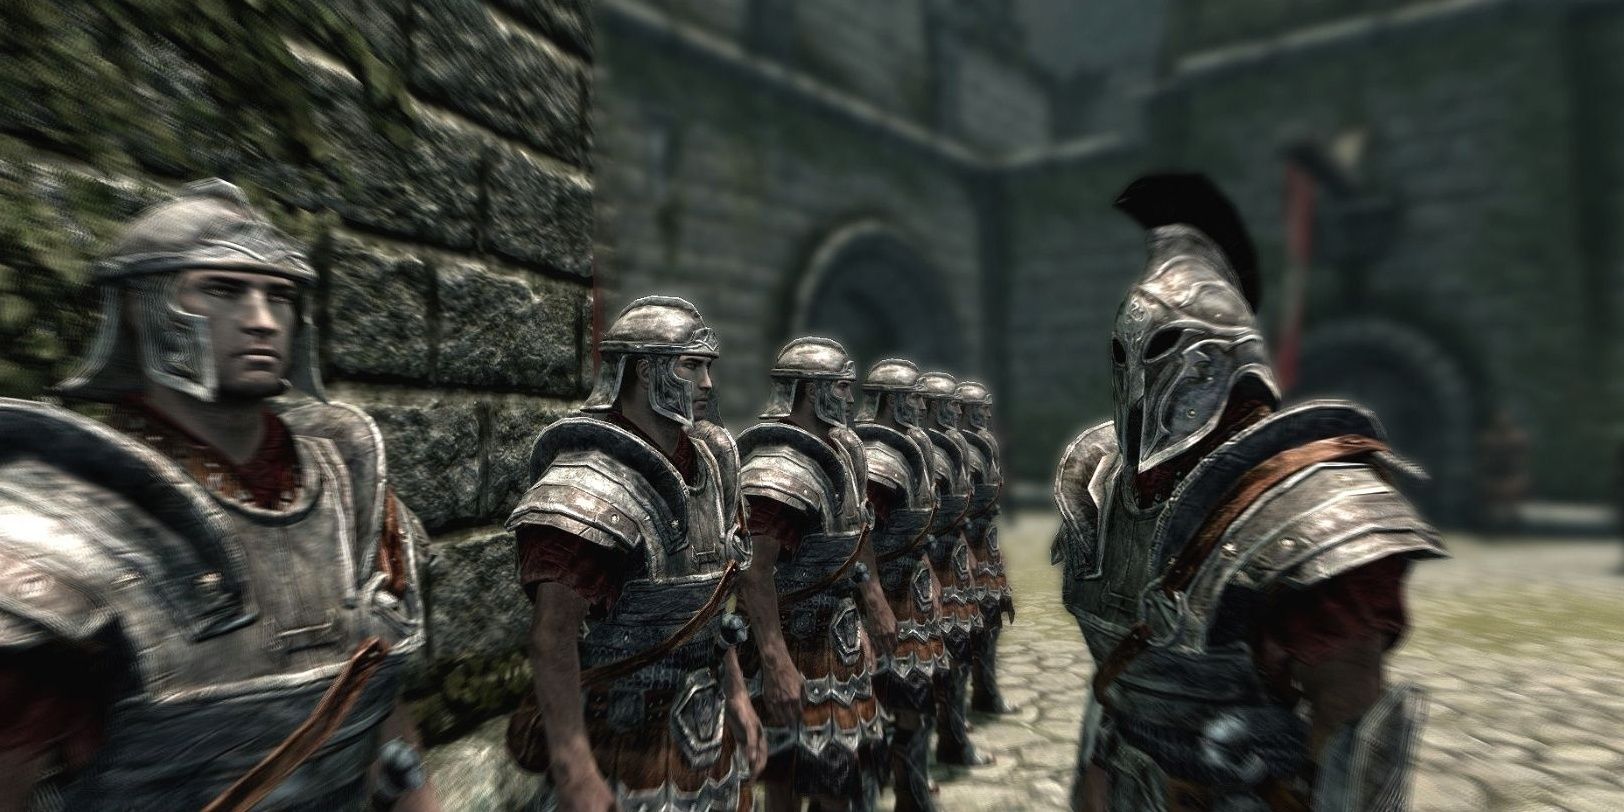 Skyrim Imperial Soldiers and Captain in Solitude